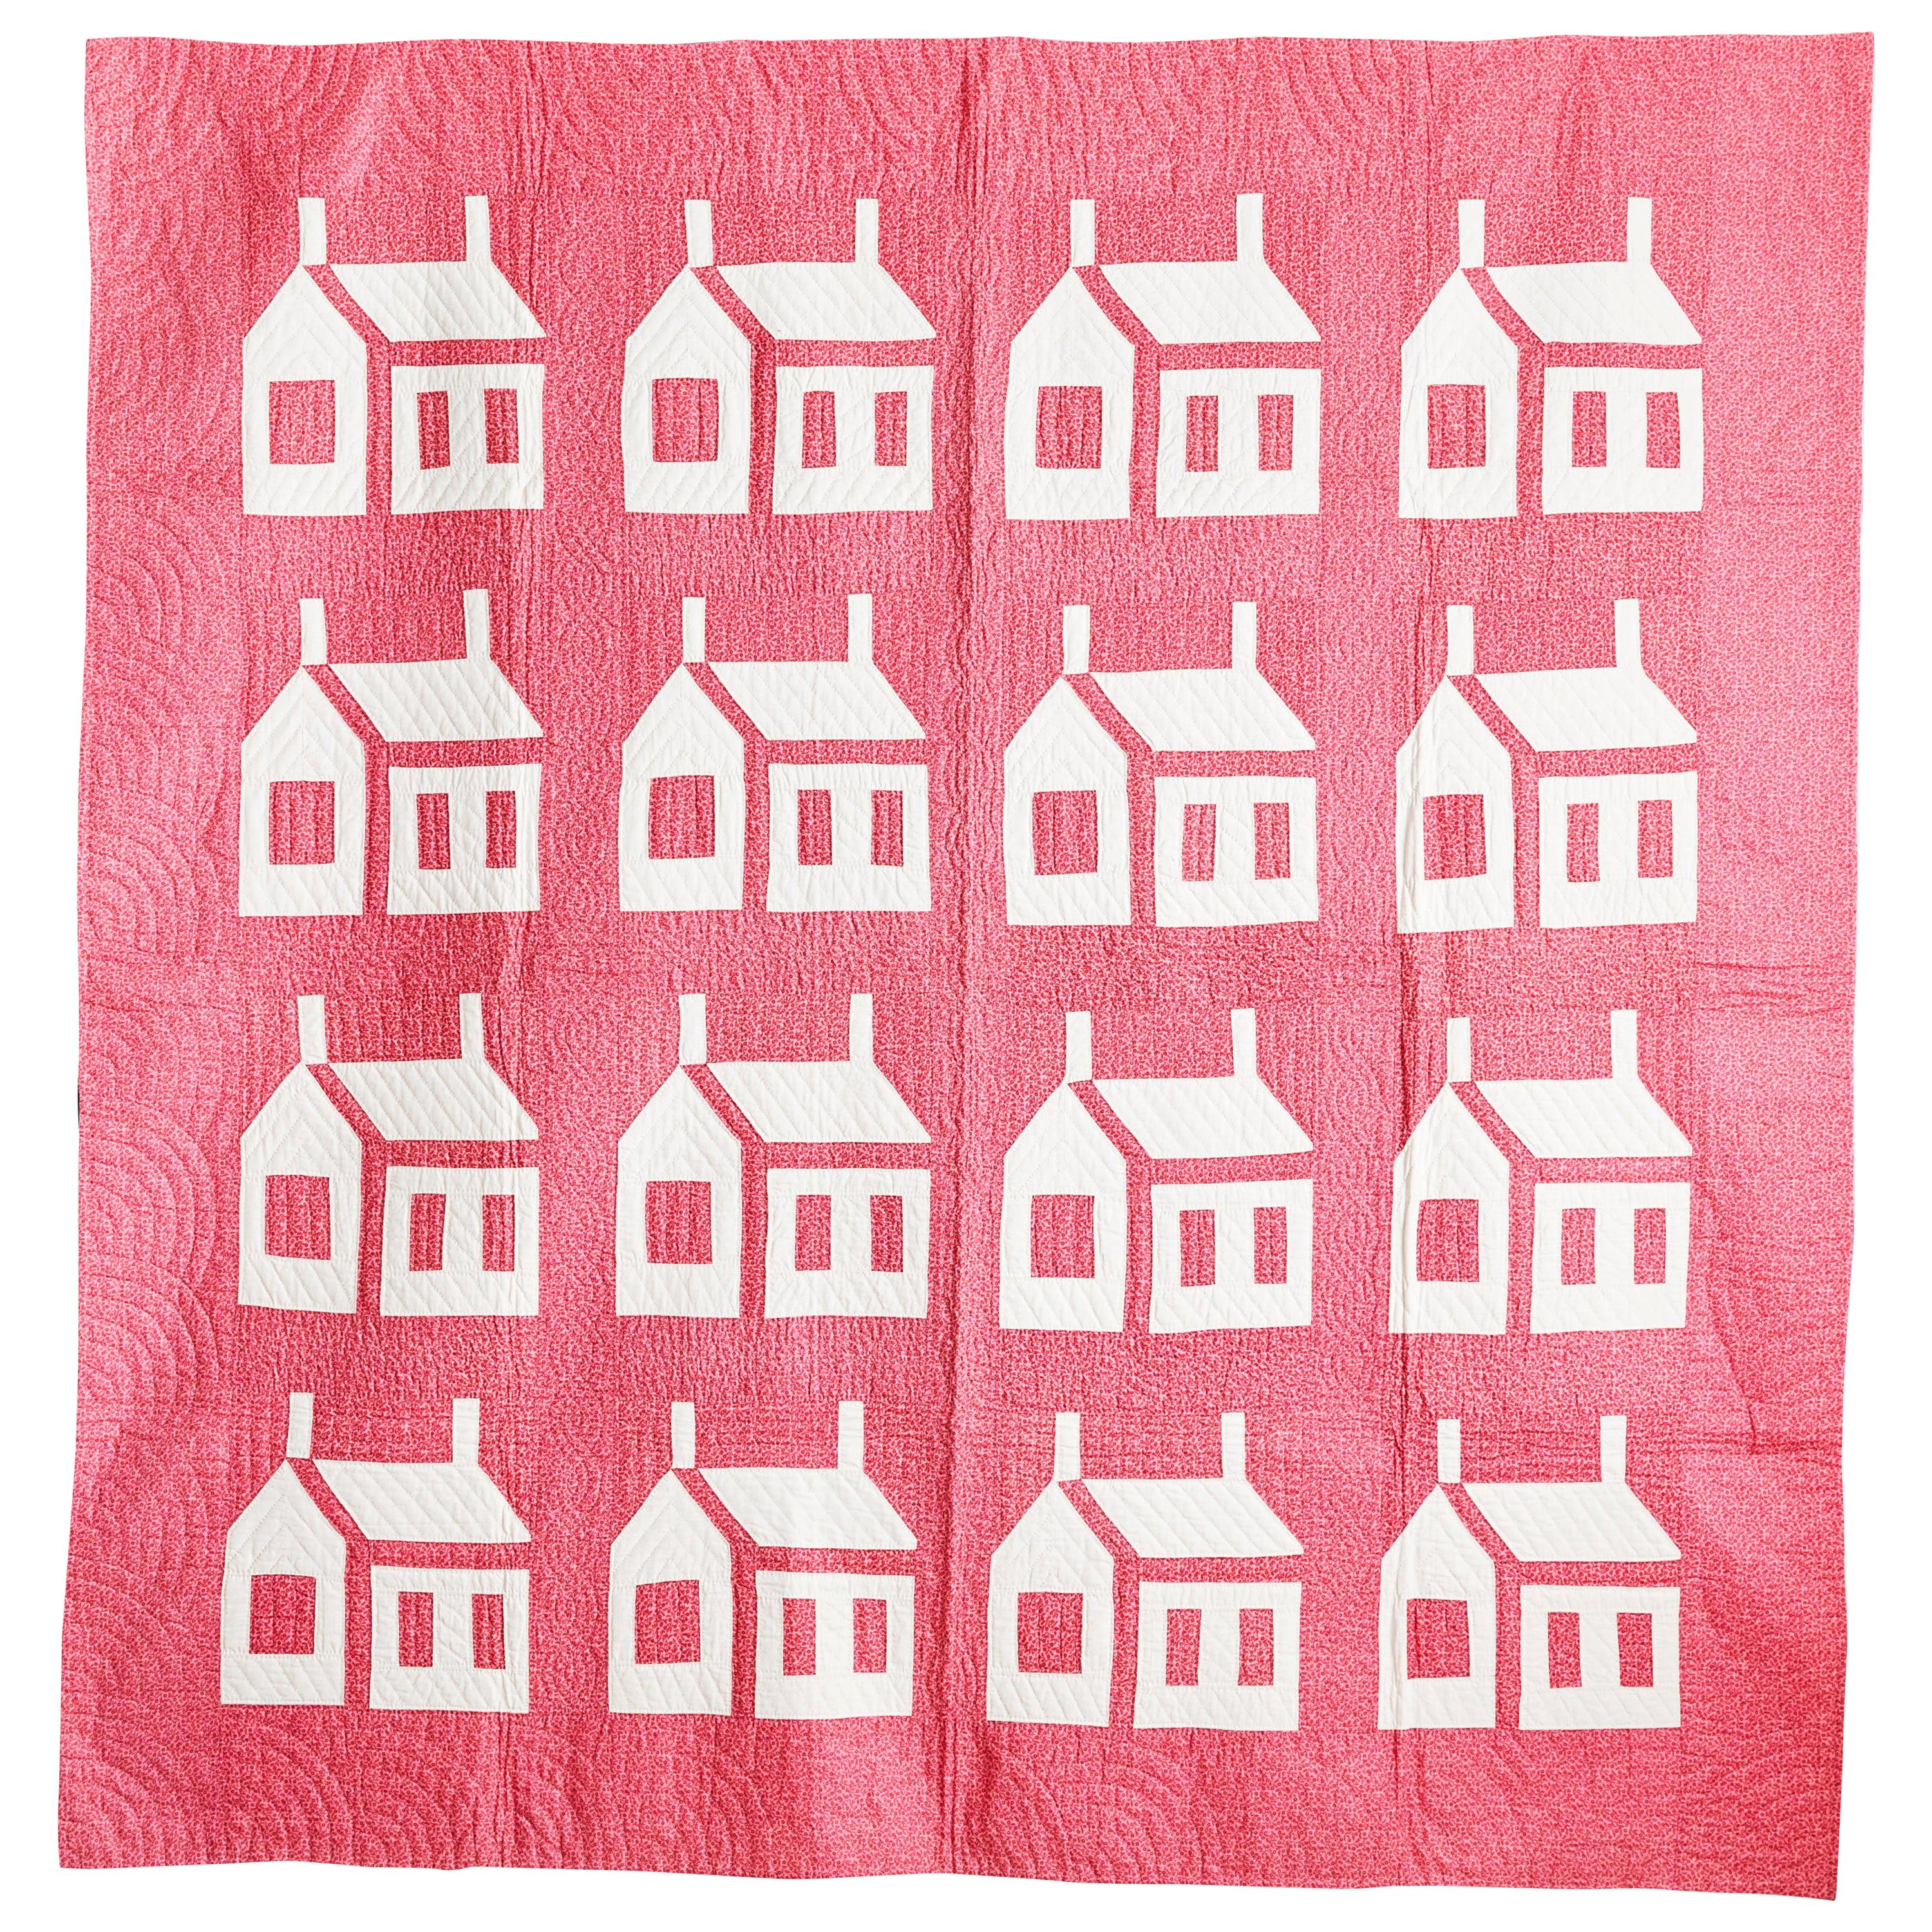 Vintage American Handmade Patchwork "Houses at Night" Quilt in Pink and White